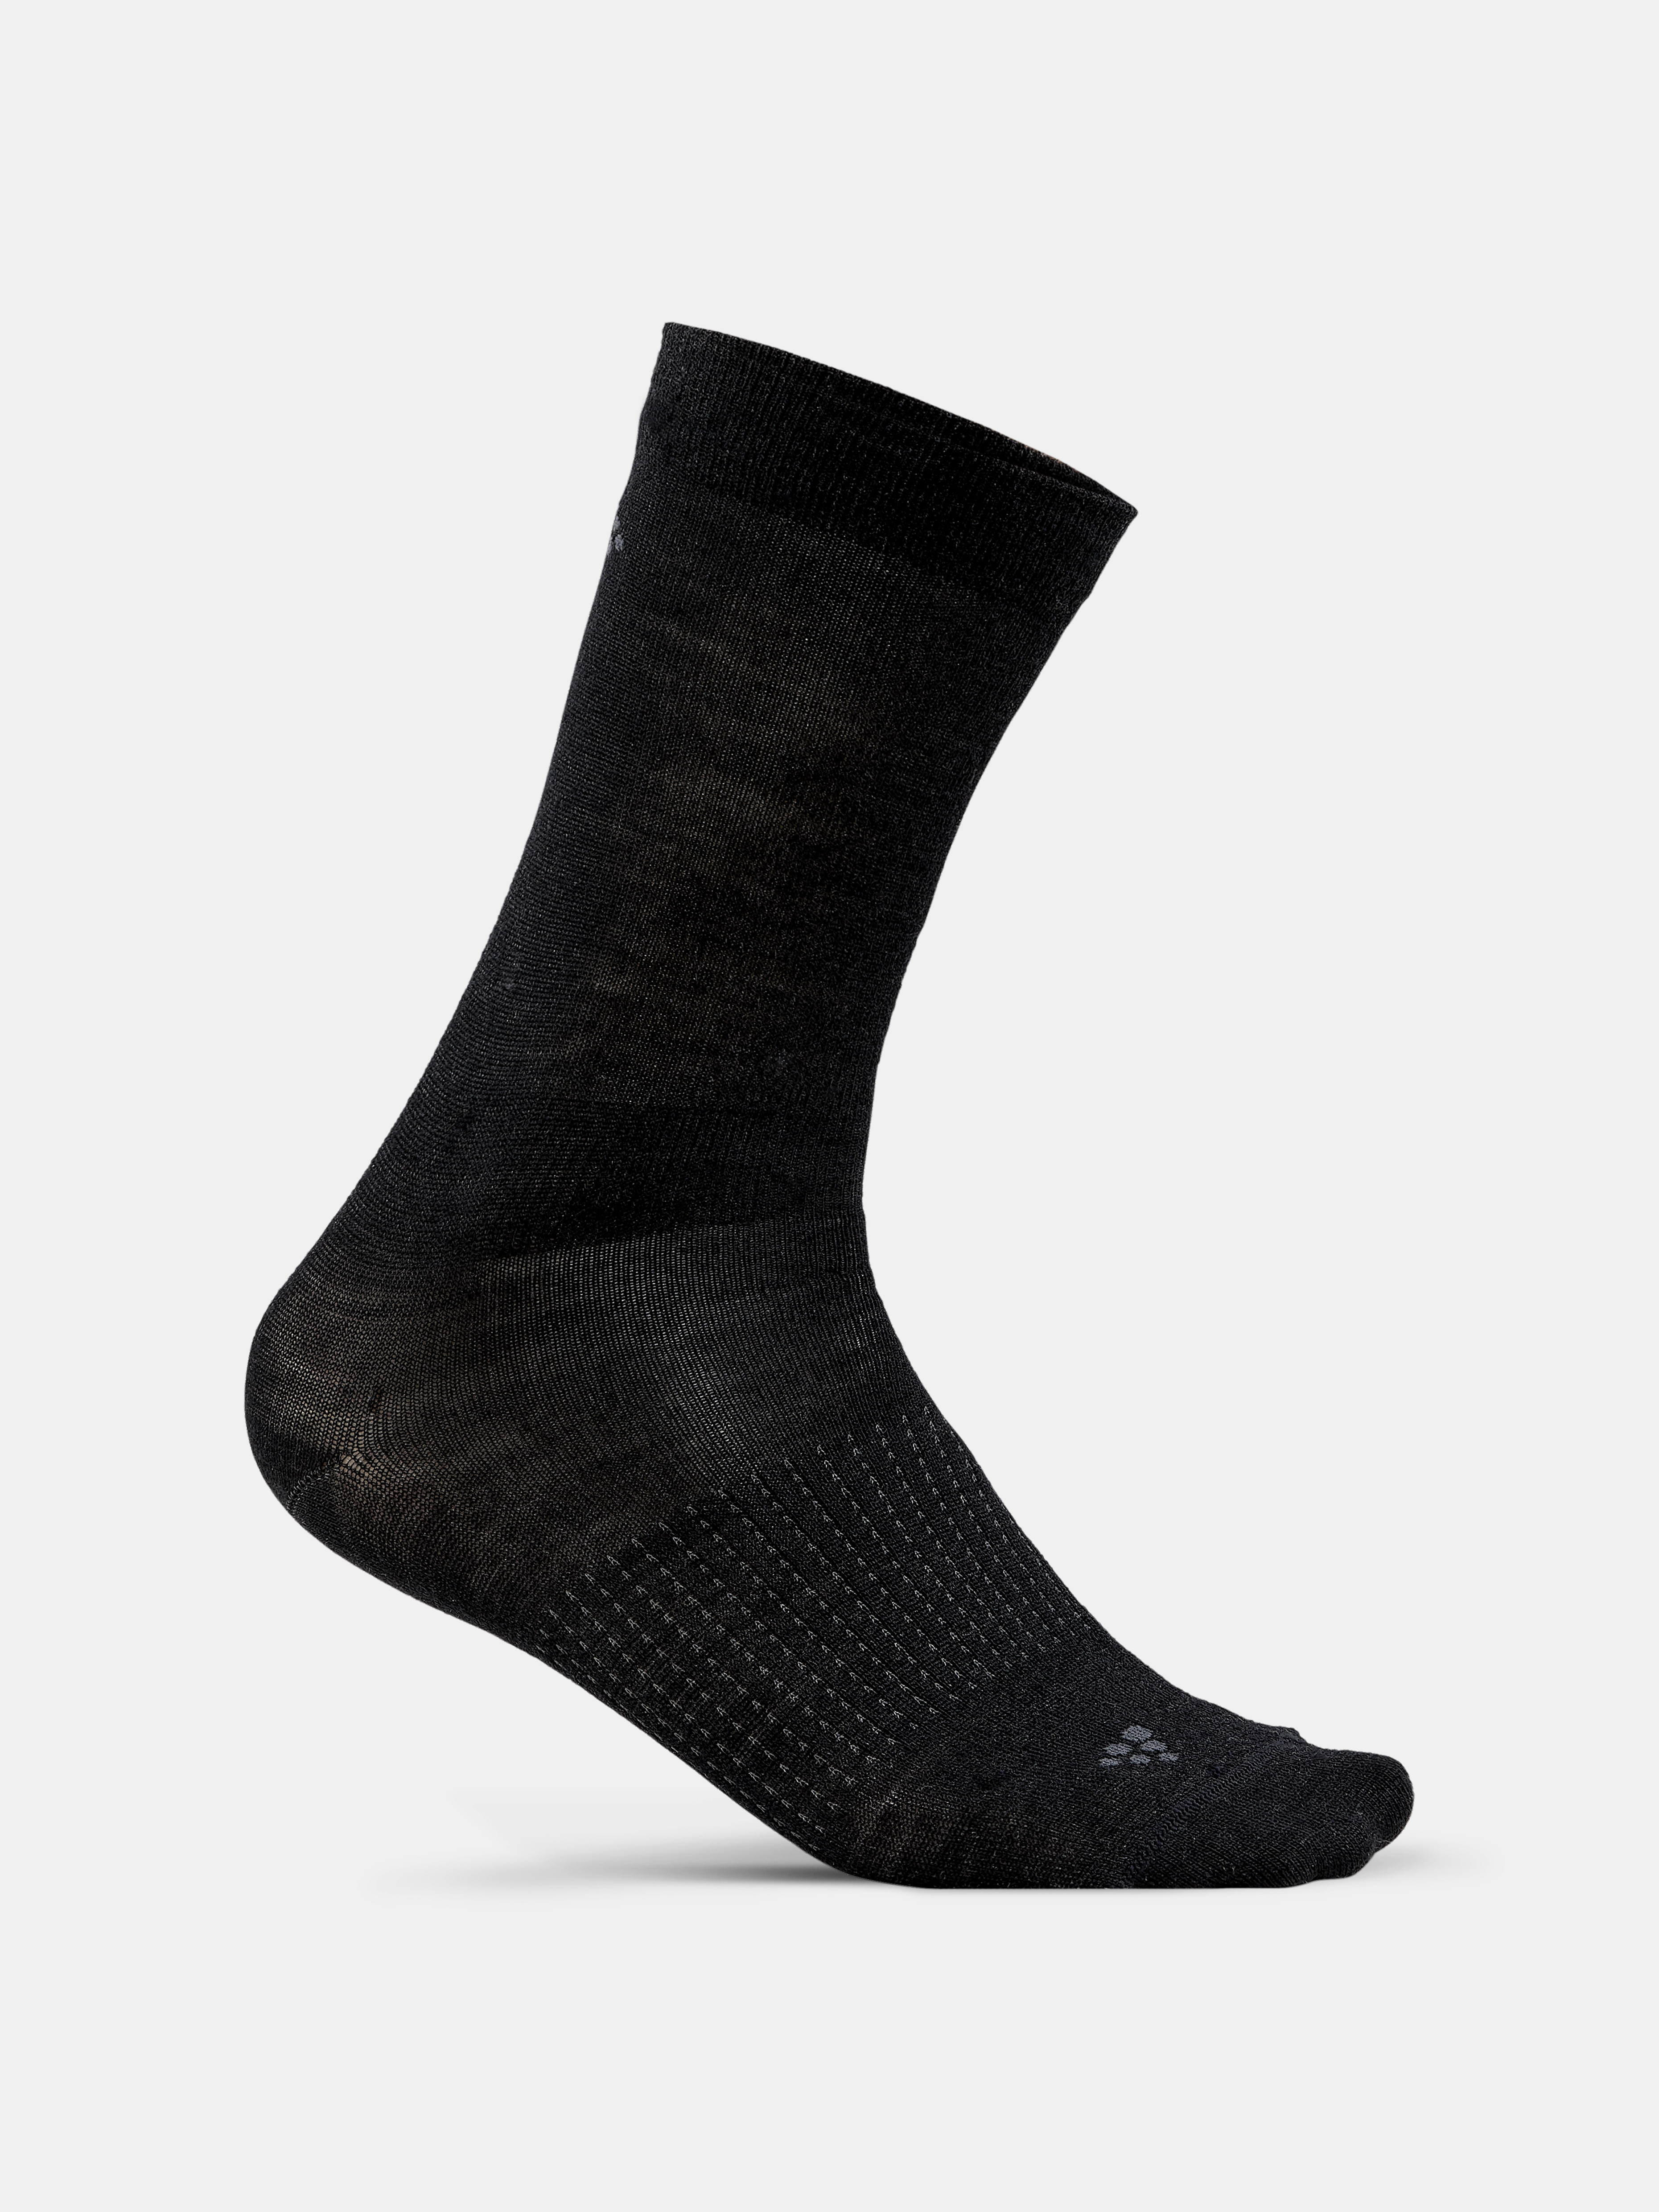 https://craft-products-production.imgix.net/images/605_b23bb58636-1907903-999000_2-pack-wool-liner-sock_front-original.jpg